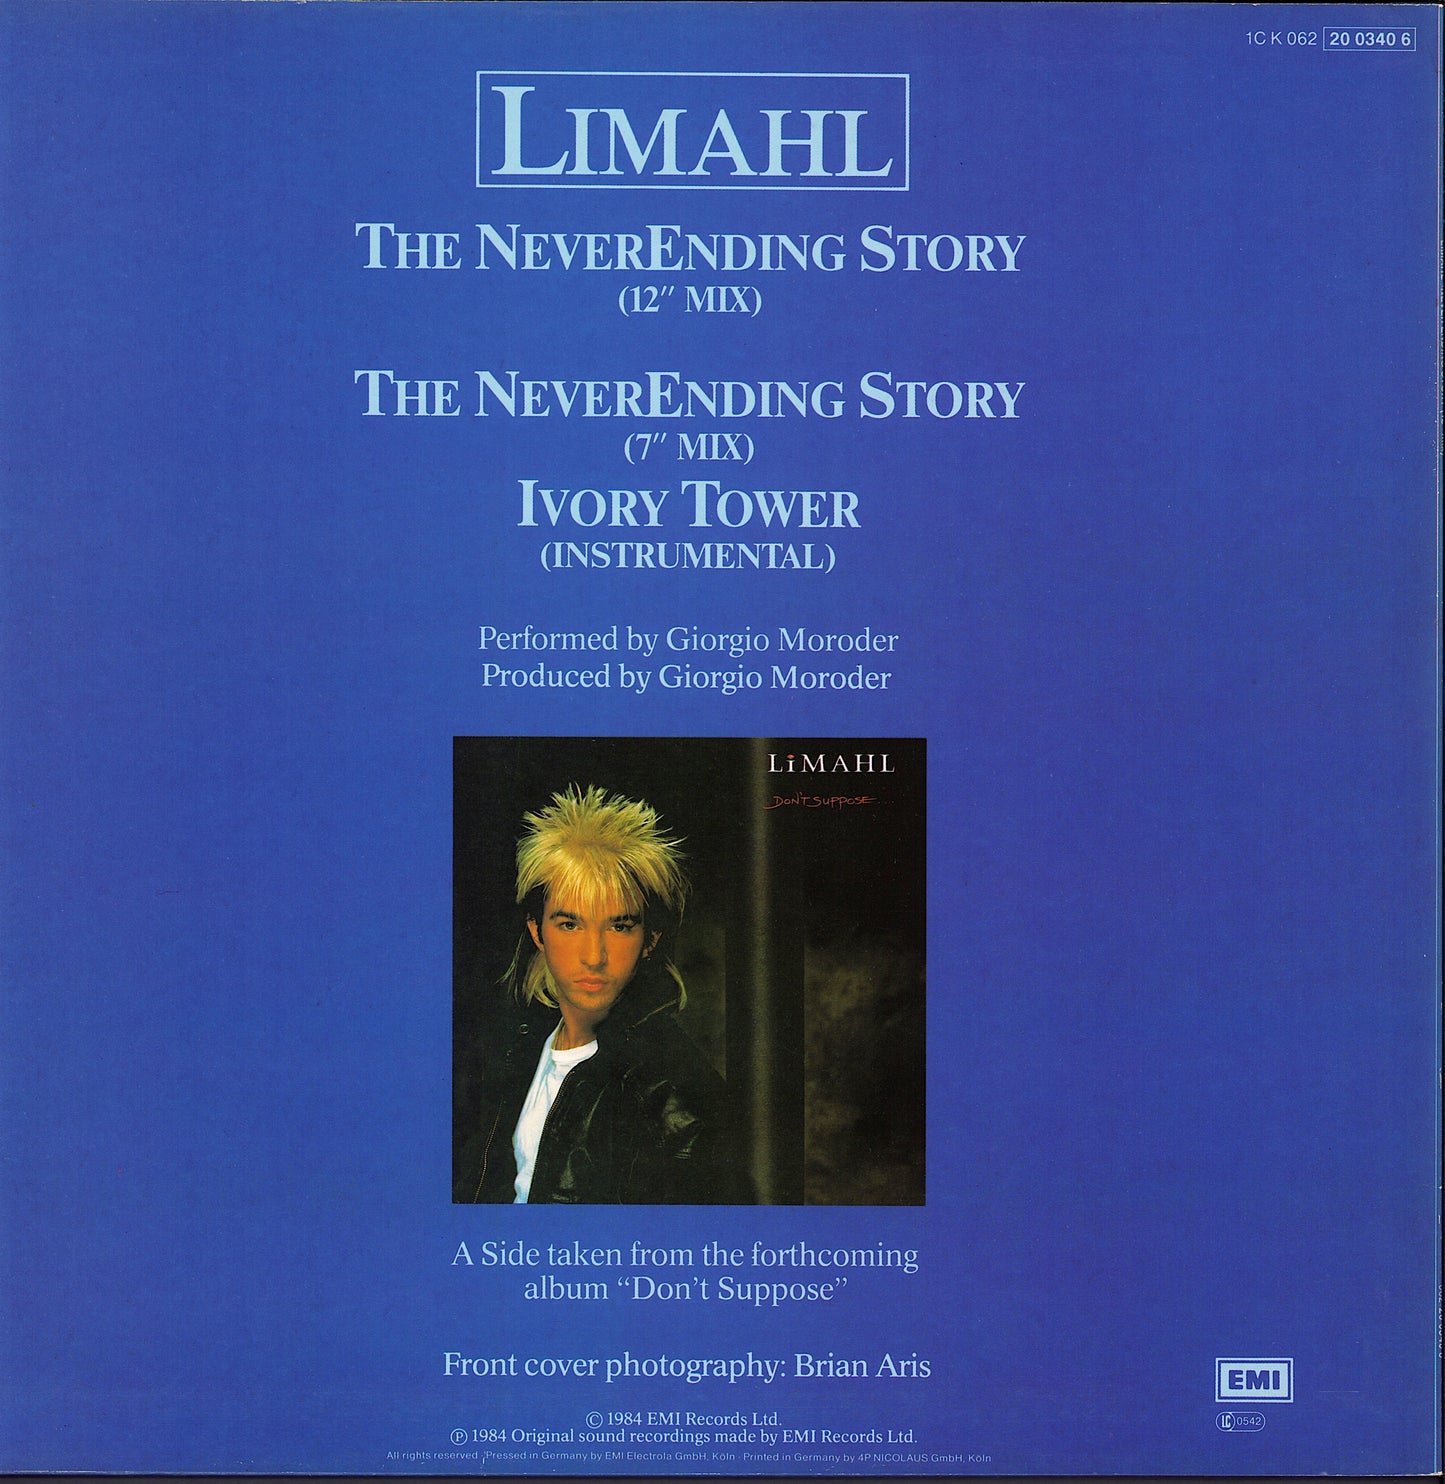 Limahl – The NeverEnding Story Special 12" Mix Vinyl 12" Maxi-Single